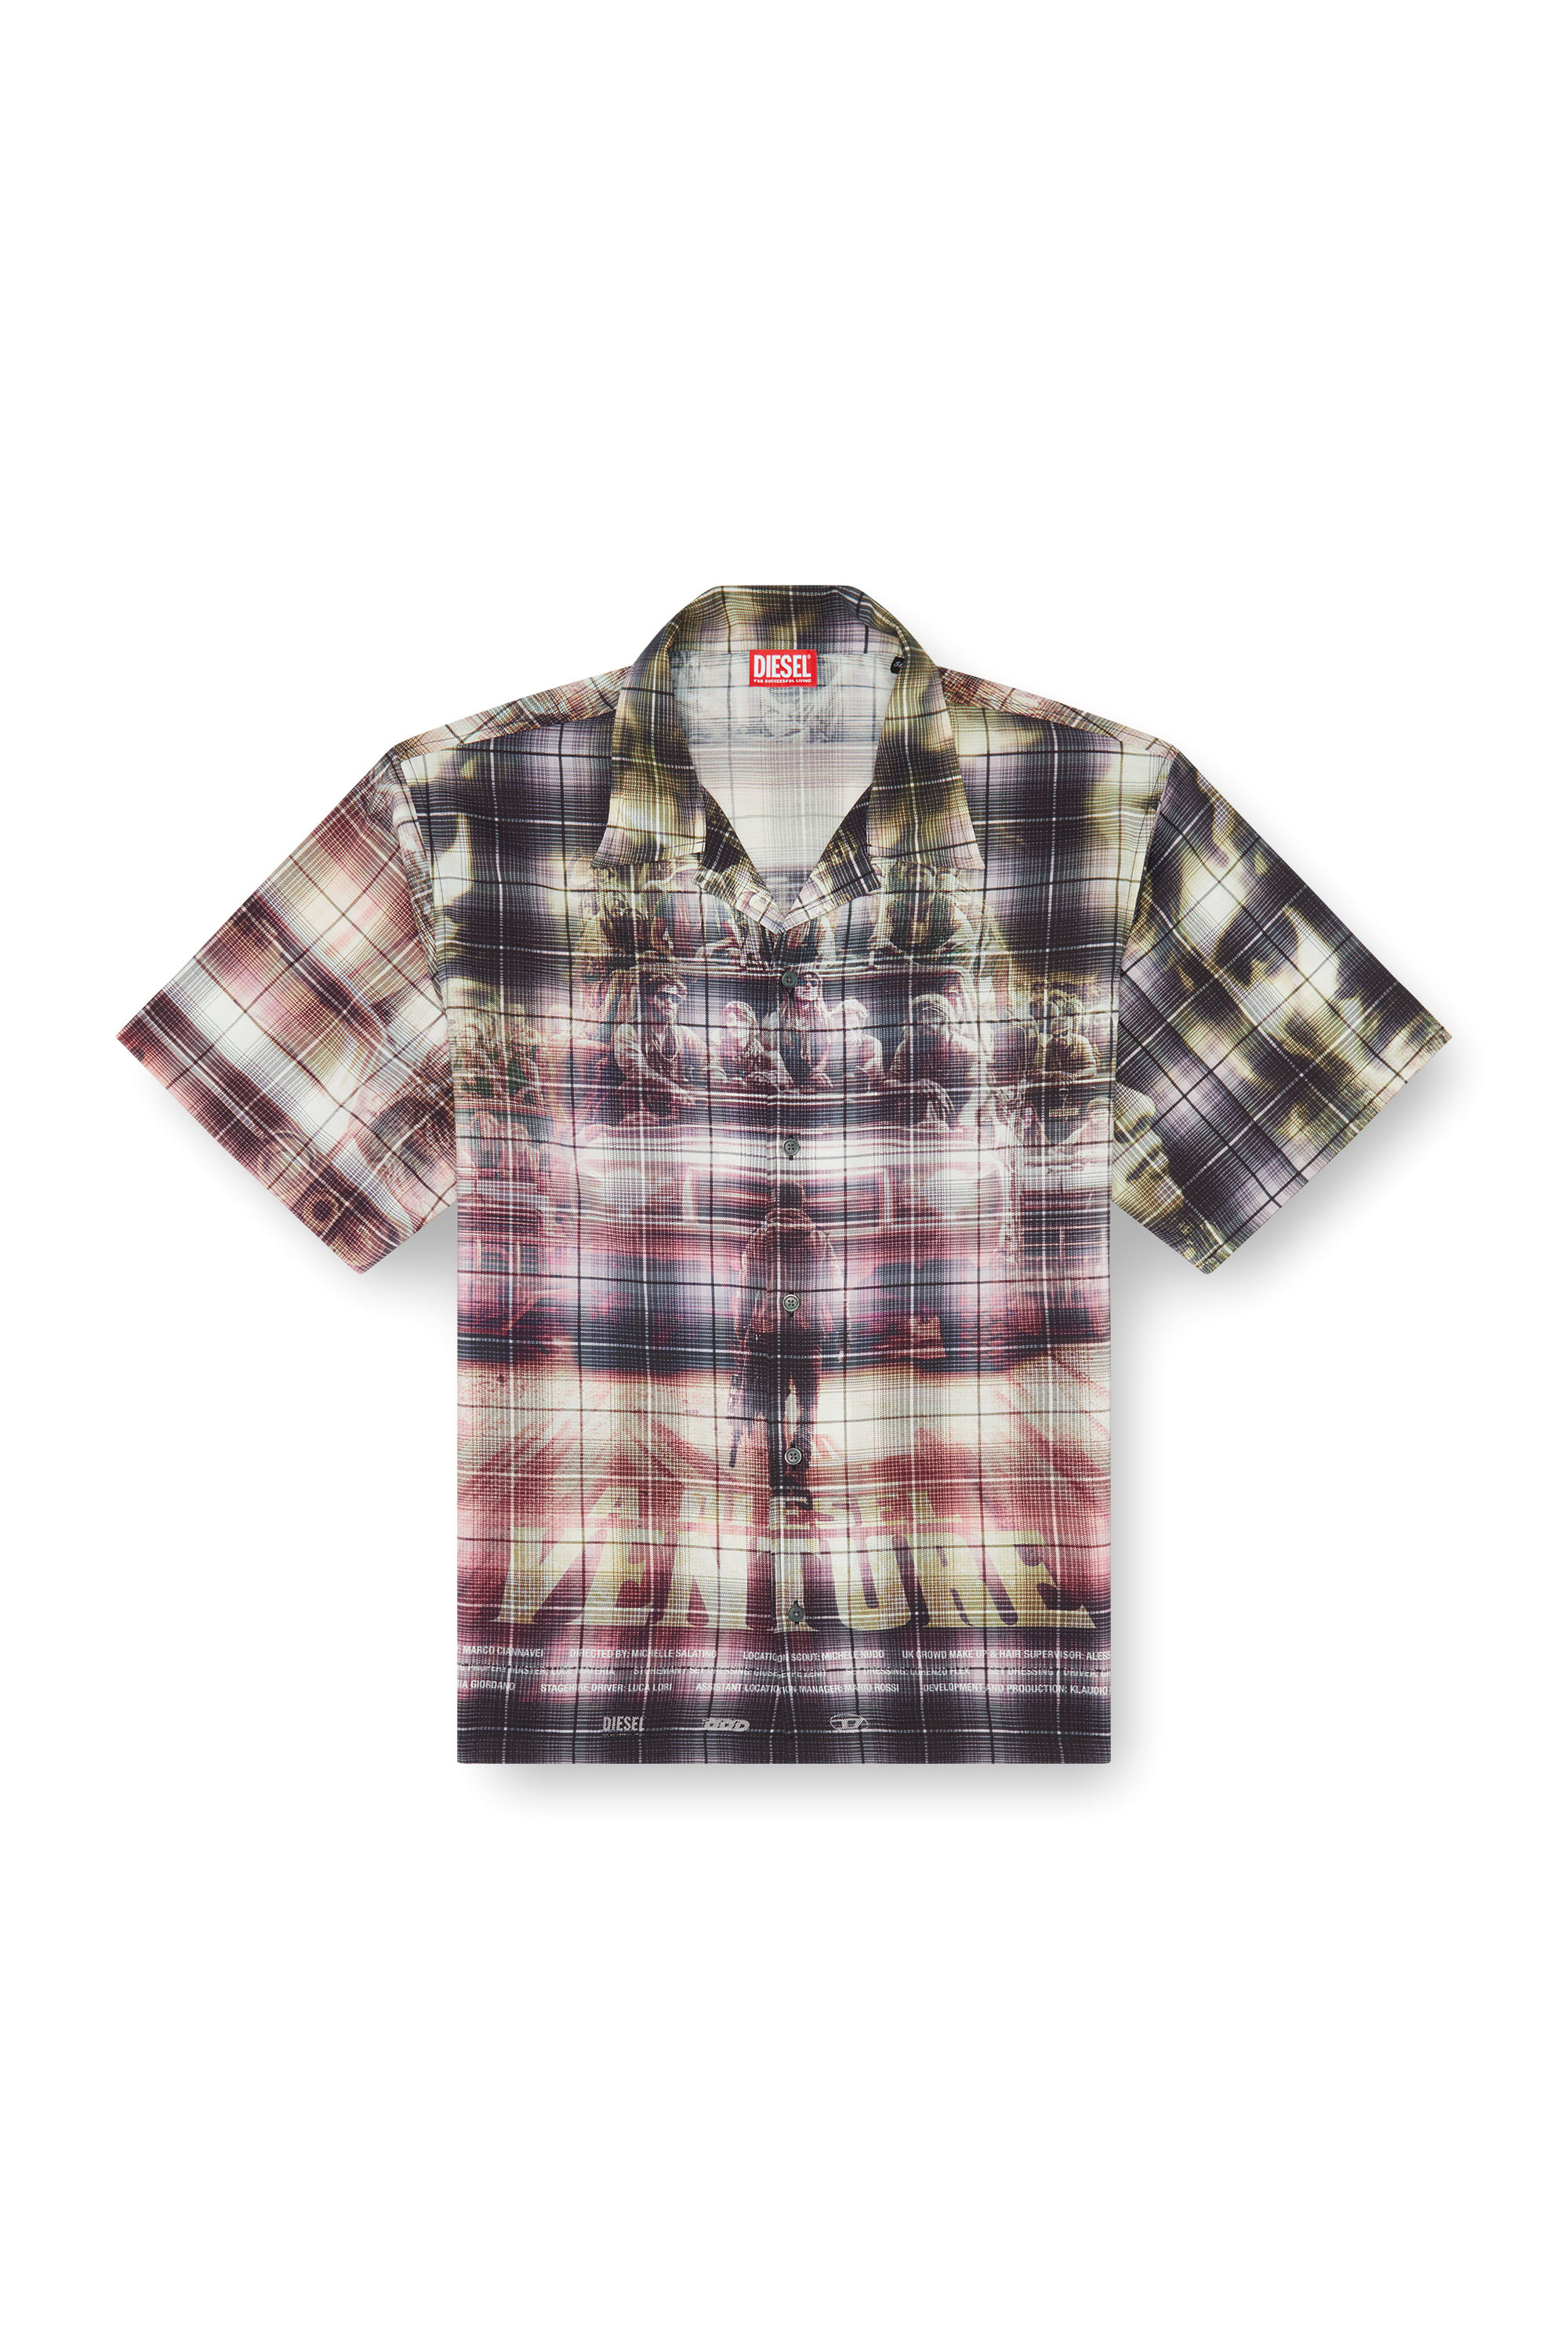 Diesel - S-TILBORG, Male Short-sleeve check shirt with poster print in マルチカラー - Image 3